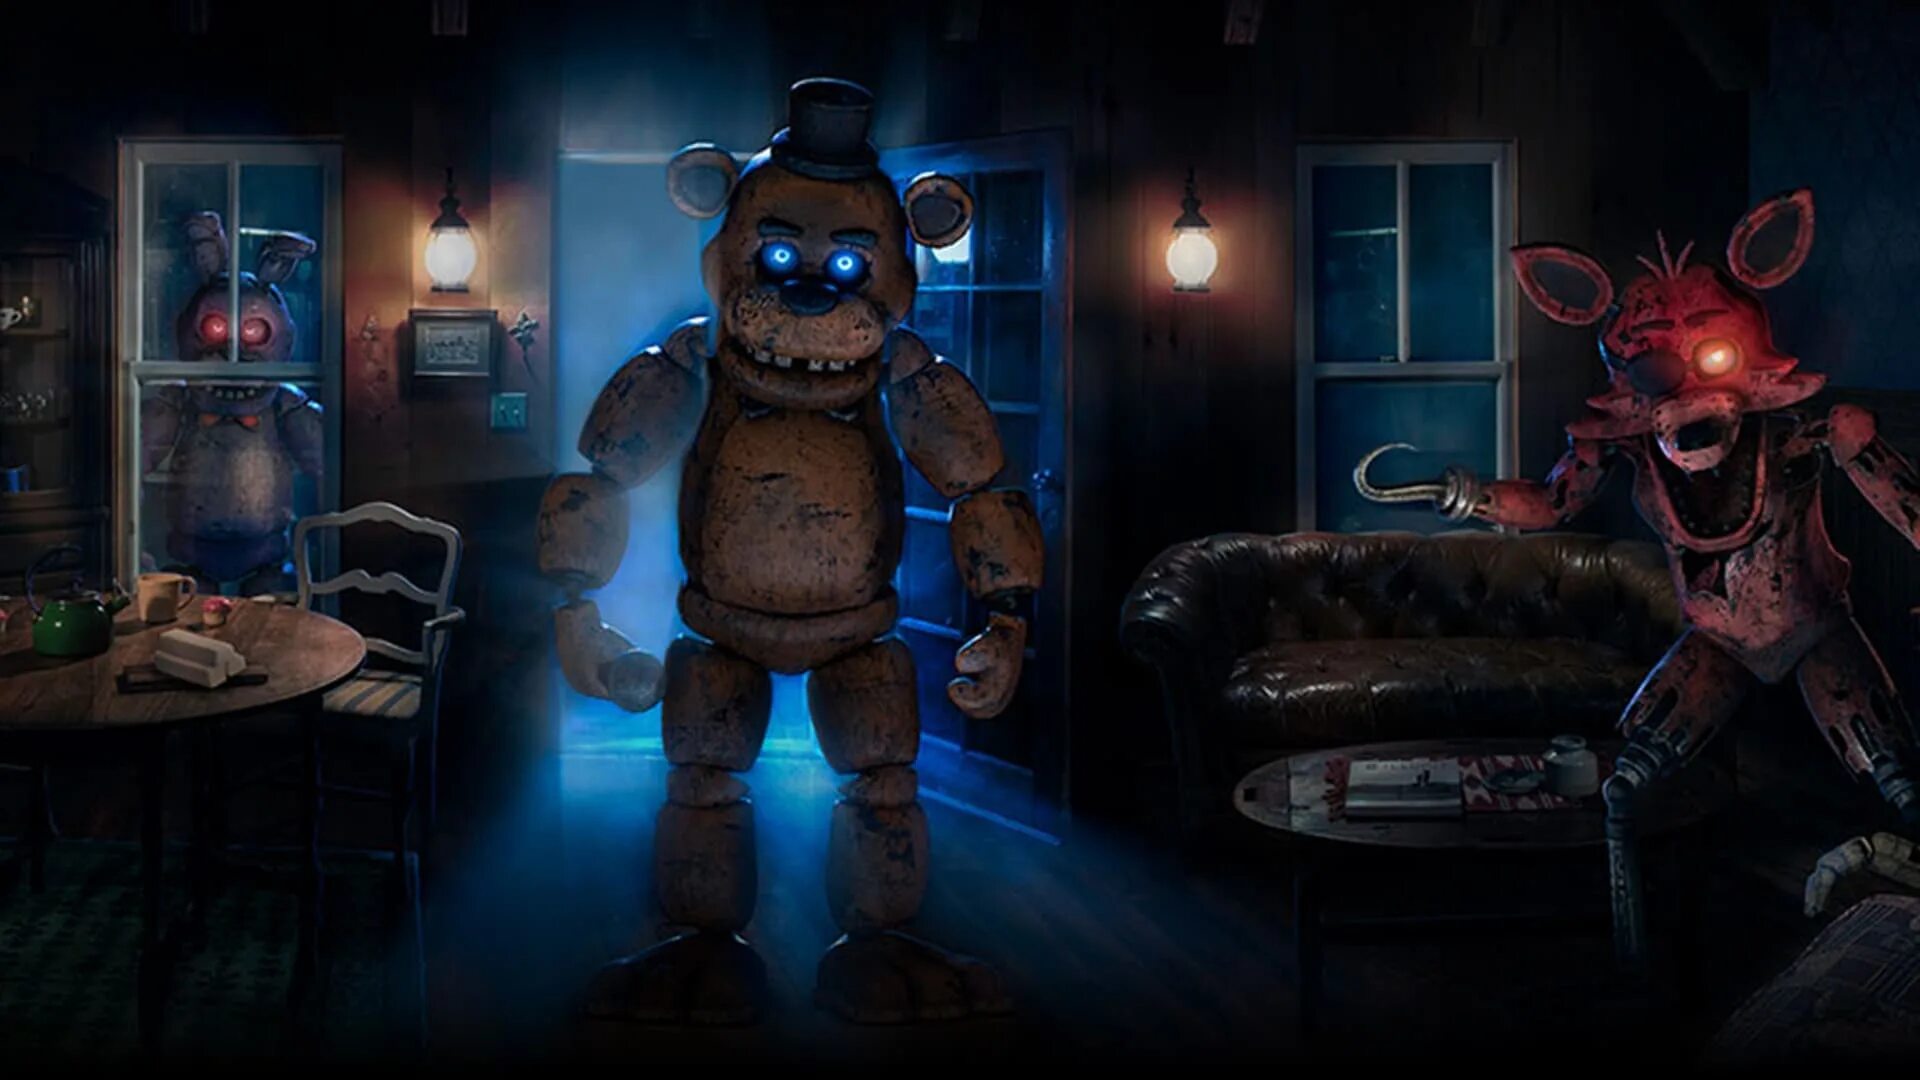 FNAF 9 Фредди. Фиве Нигхт АТ Фредди. ФНАФ Special delivery АНИМАТРОНИКИ. FNAF ar Special delivery Фредди. Freddy s game